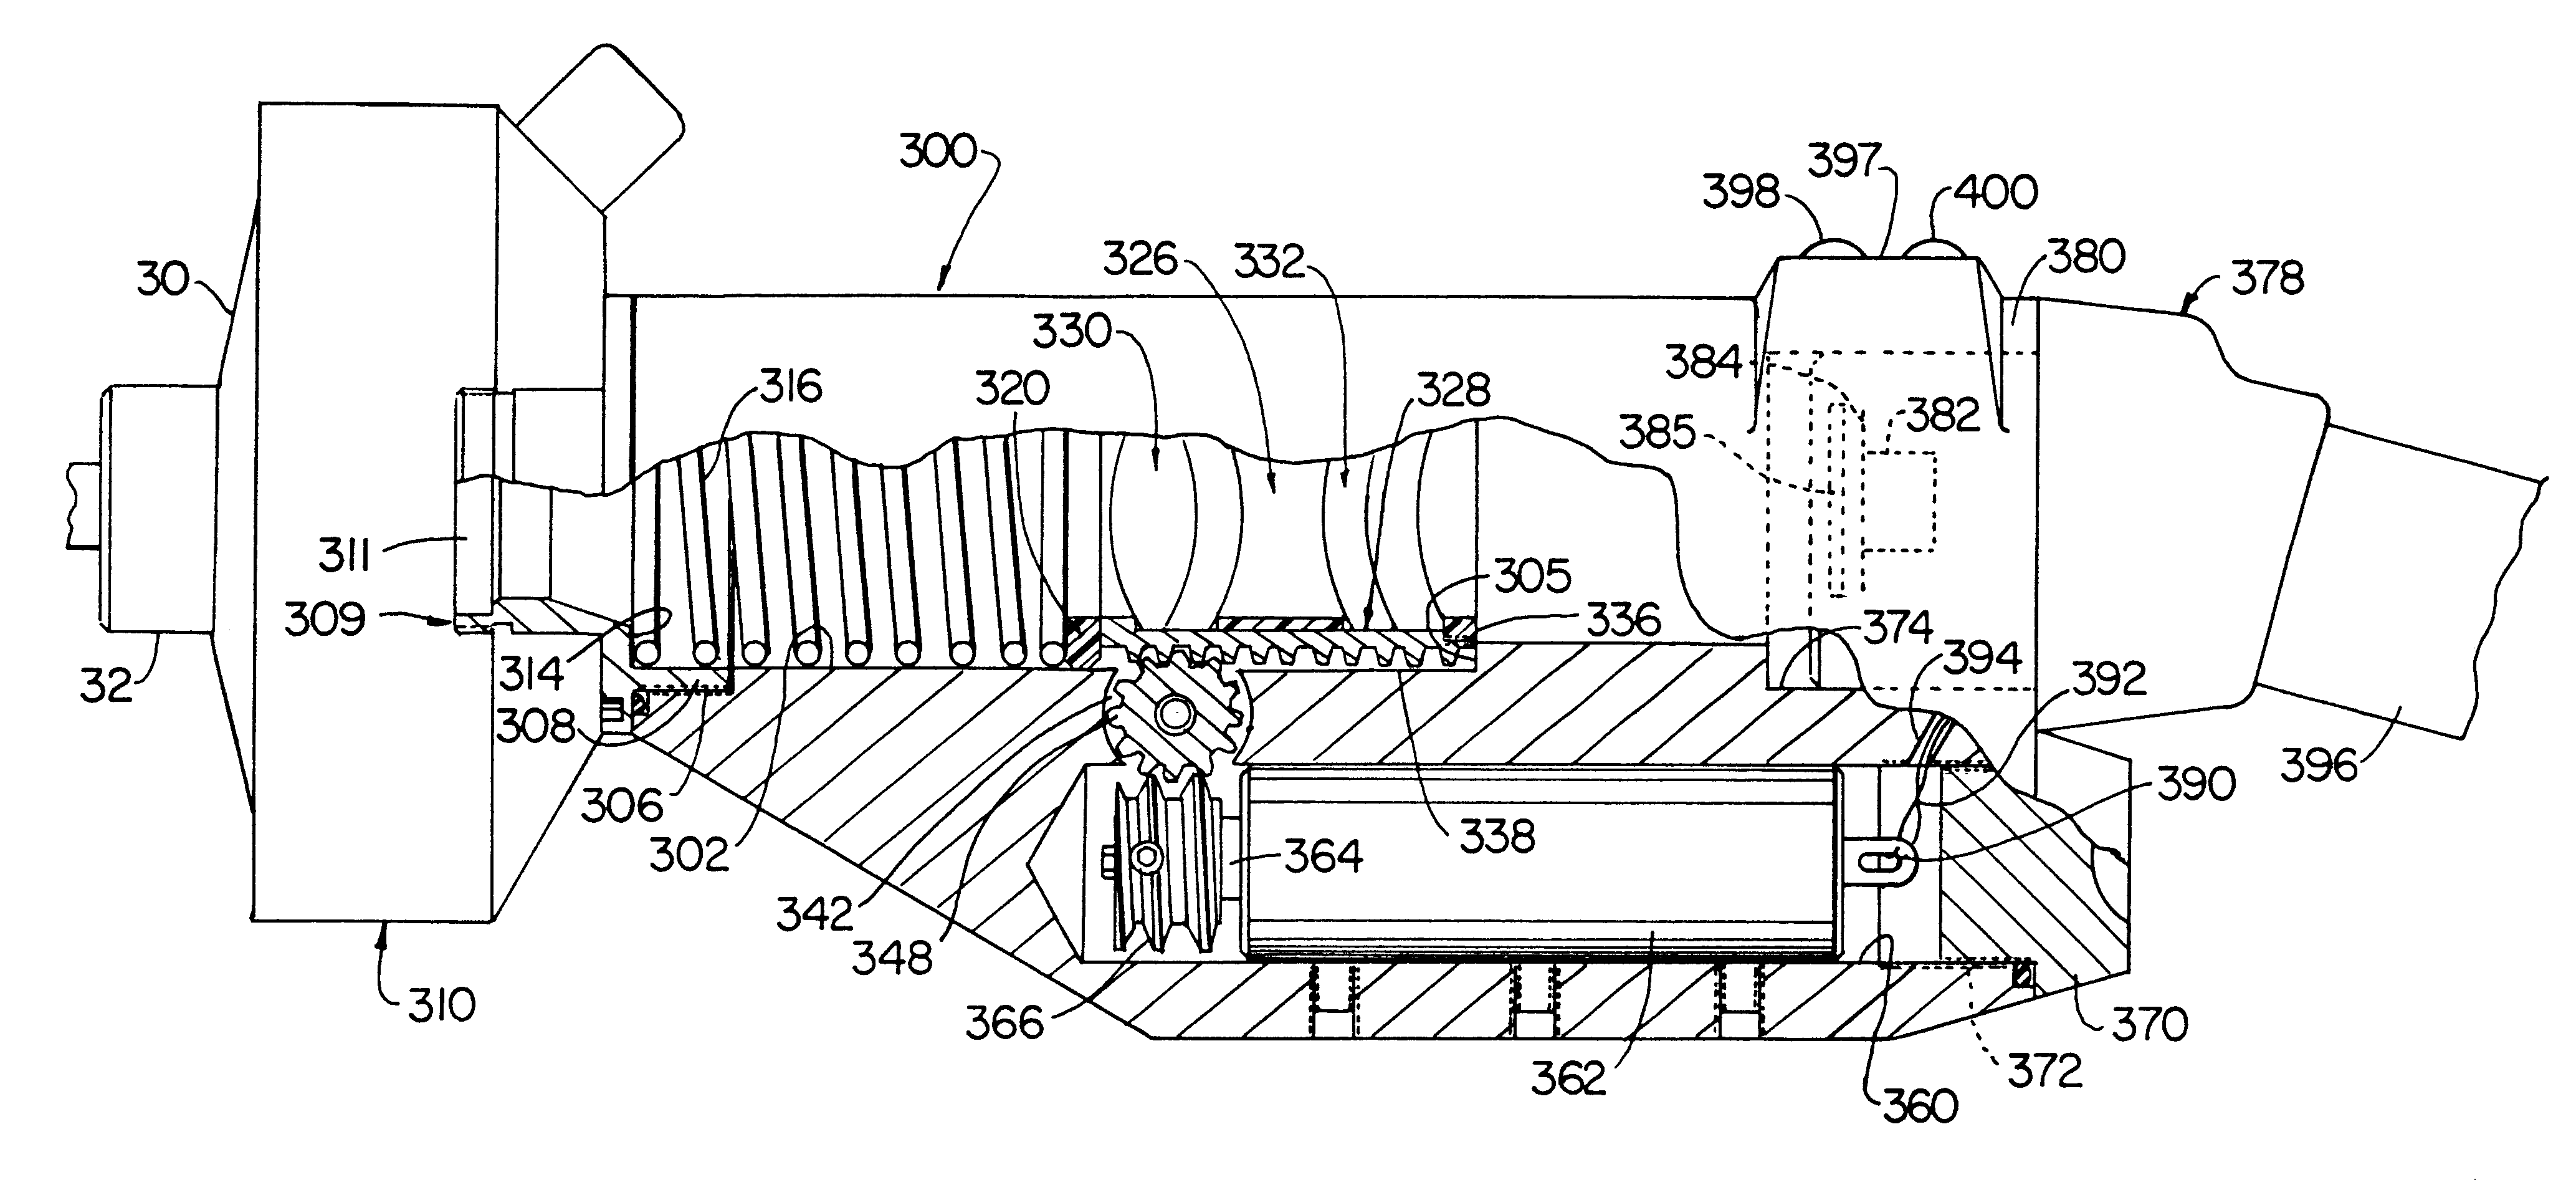 Motorized focusing device and viewing system utilizing same